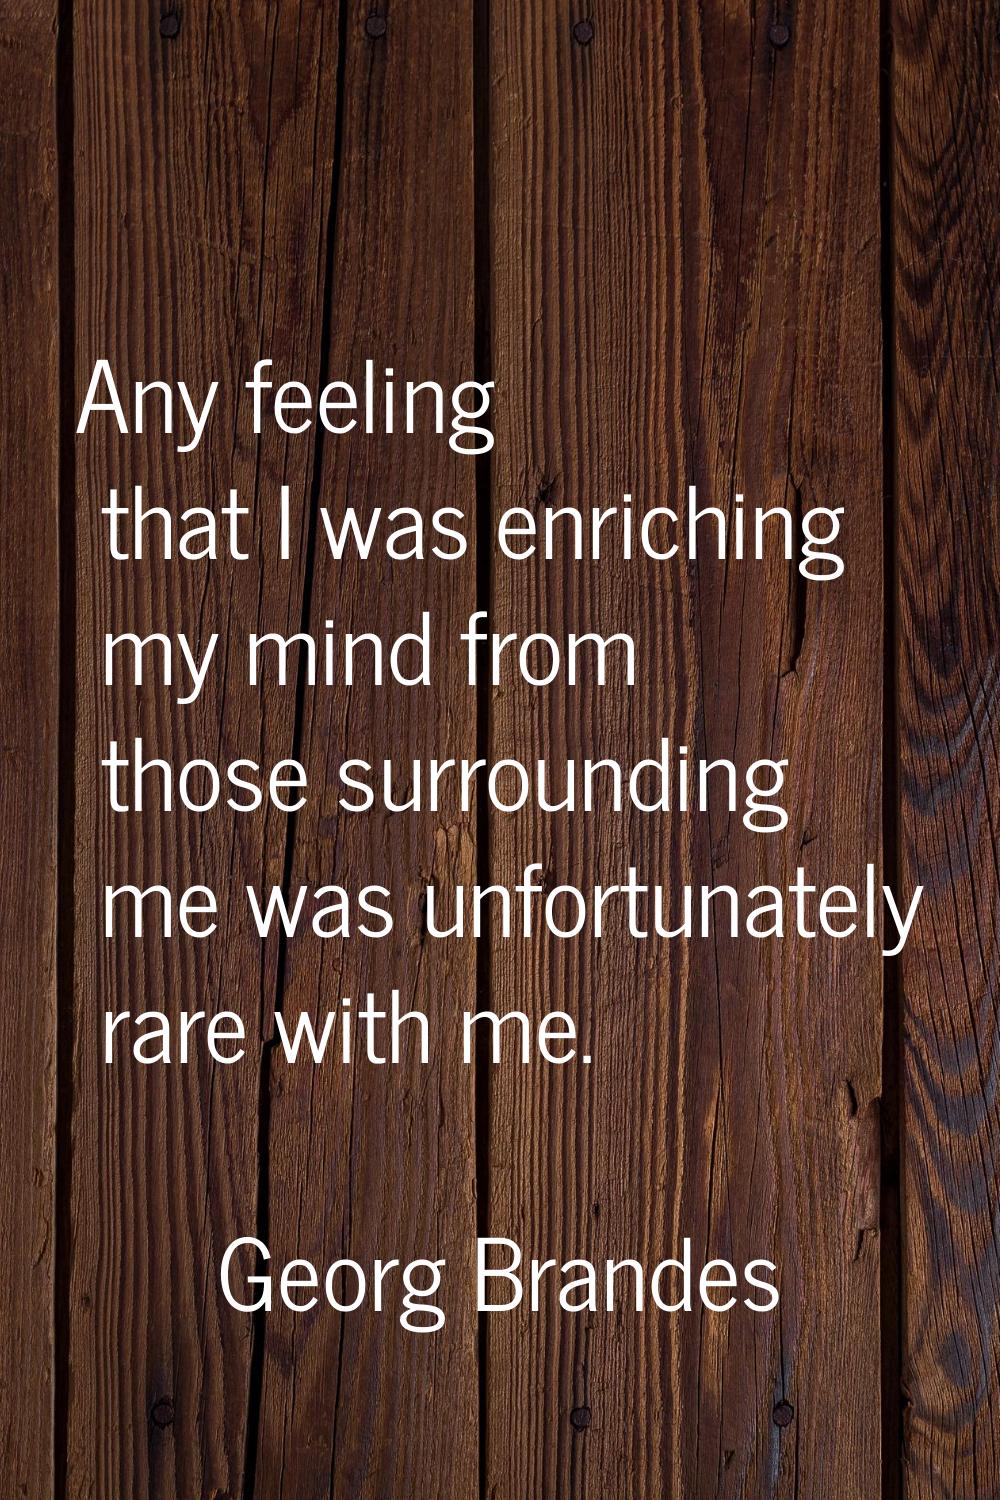 Any feeling that I was enriching my mind from those surrounding me was unfortunately rare with me.